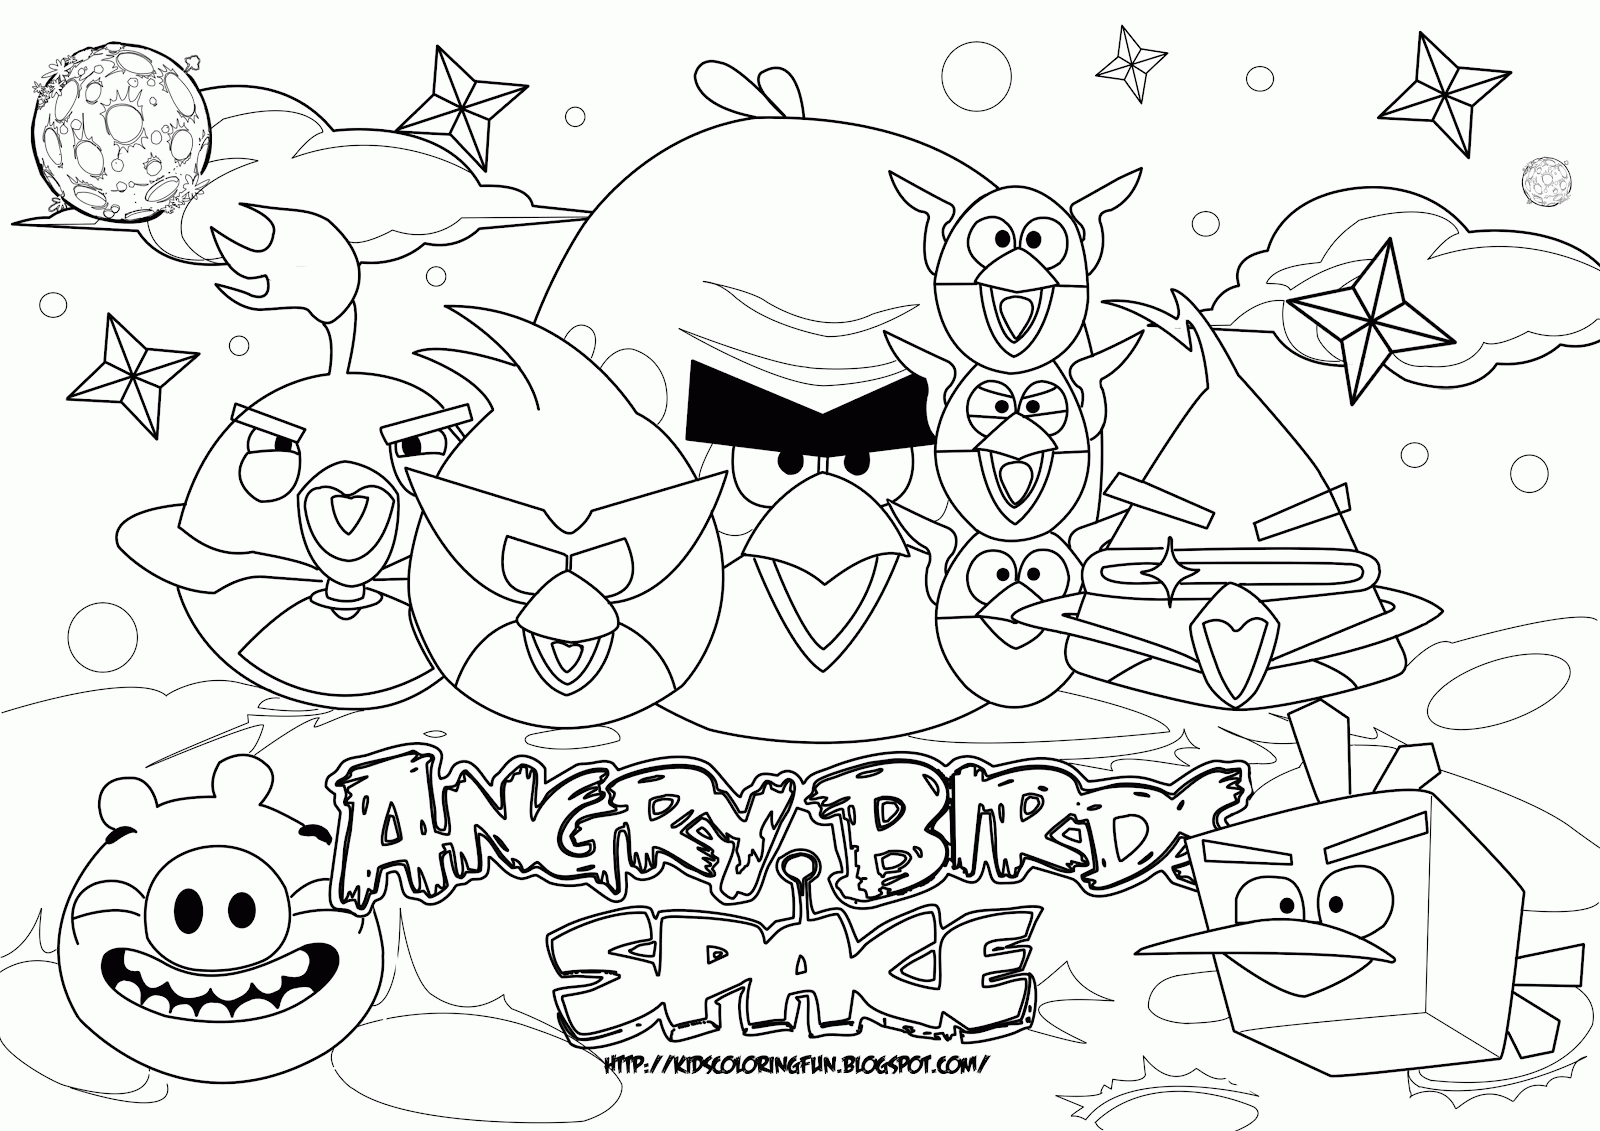 Related Angry Bird Coloring Pages item-13993, Angry Bird Coloring ...